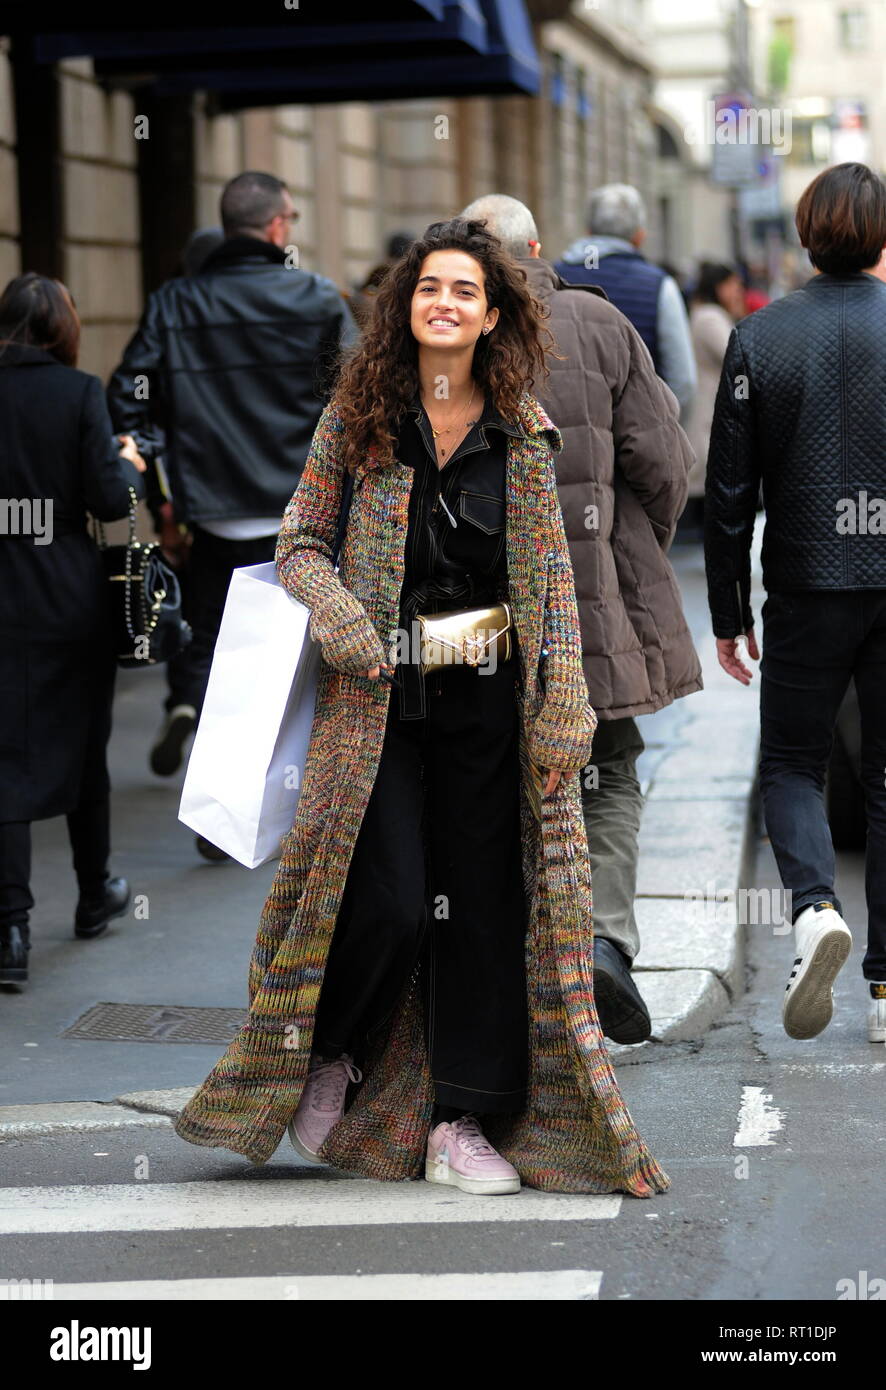 Milan, Chiara Scelsi shopping downtown with friends Chiara Scelsi, one of  the favorite supermodels by Dolce & Gabbana stylists, stroll through the  streets of downtown with two friends. Here it is in